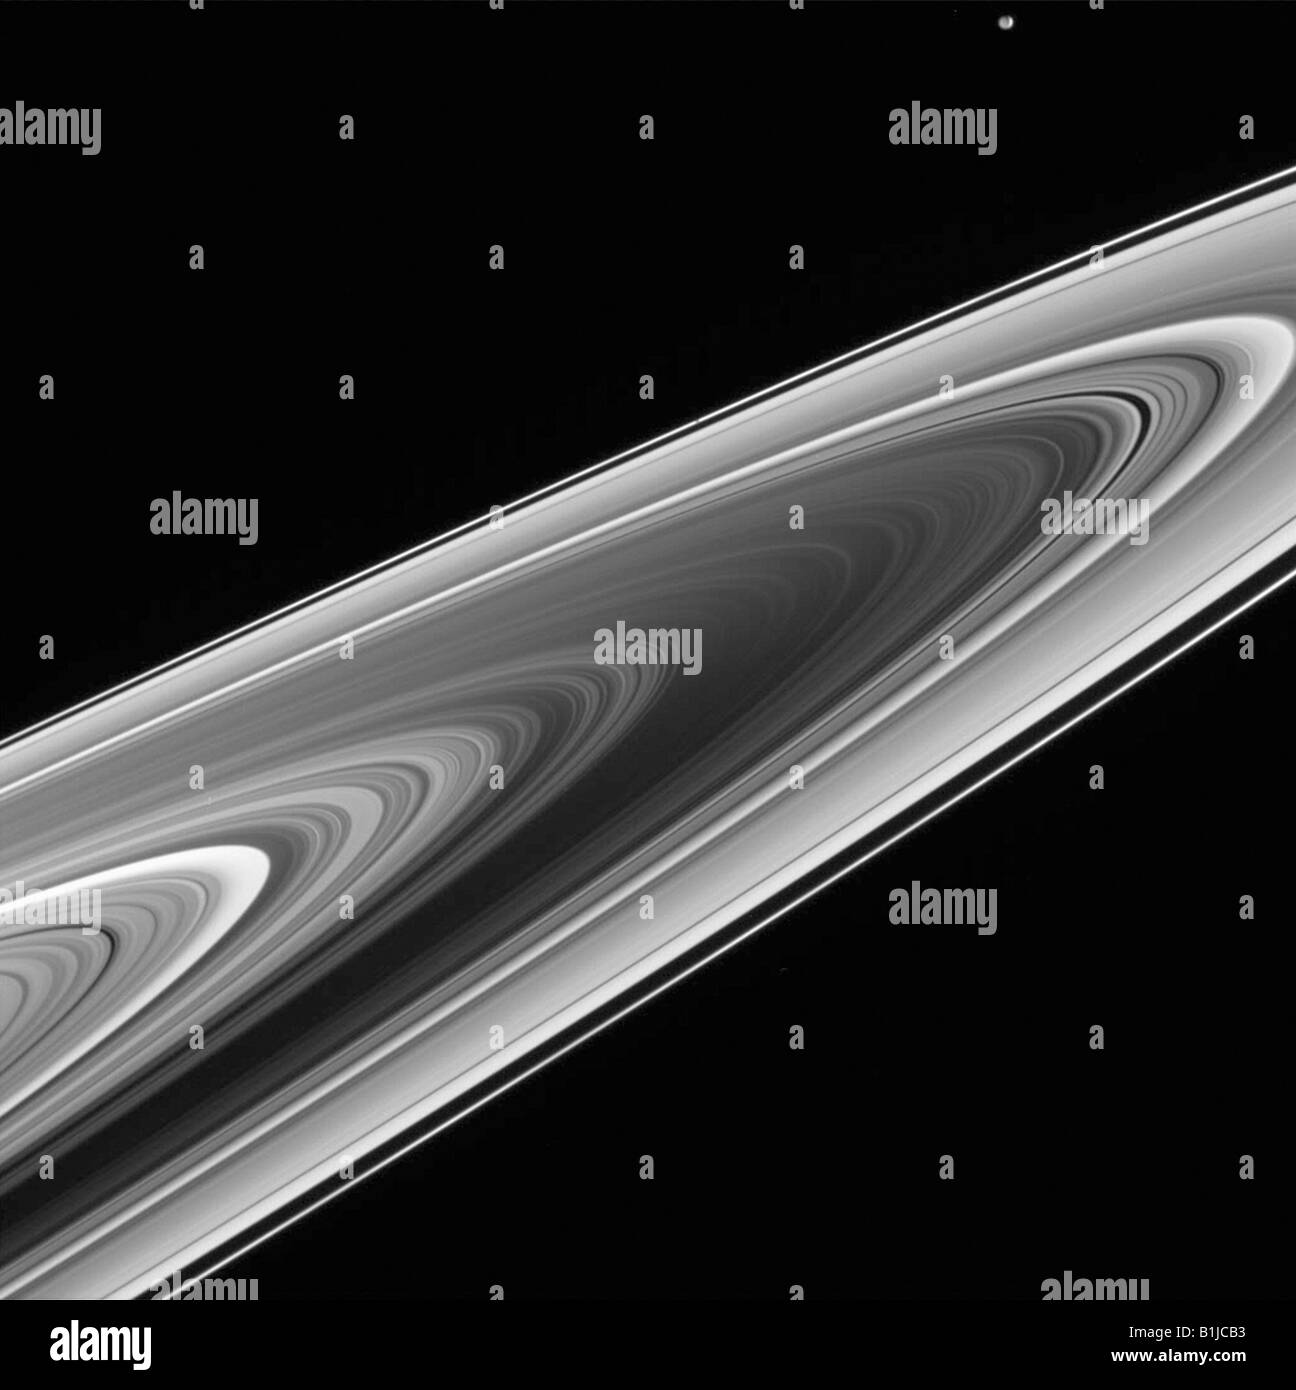 Saturn's Rings Will Exist for Just a Blip in Time | HowStuffWorks